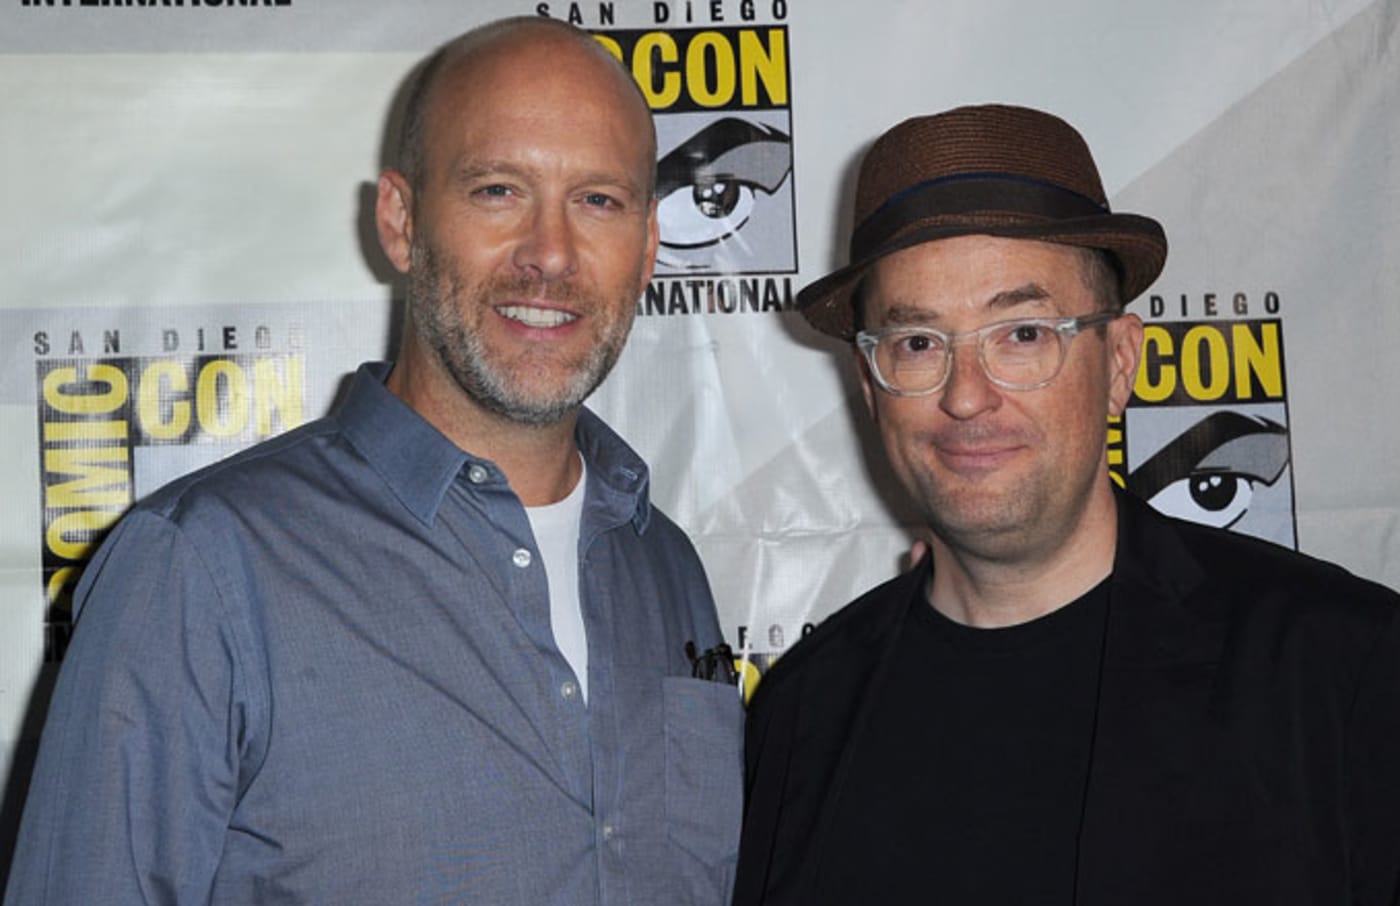 Avengers writers Stephen McFeely and Christopher Markus.